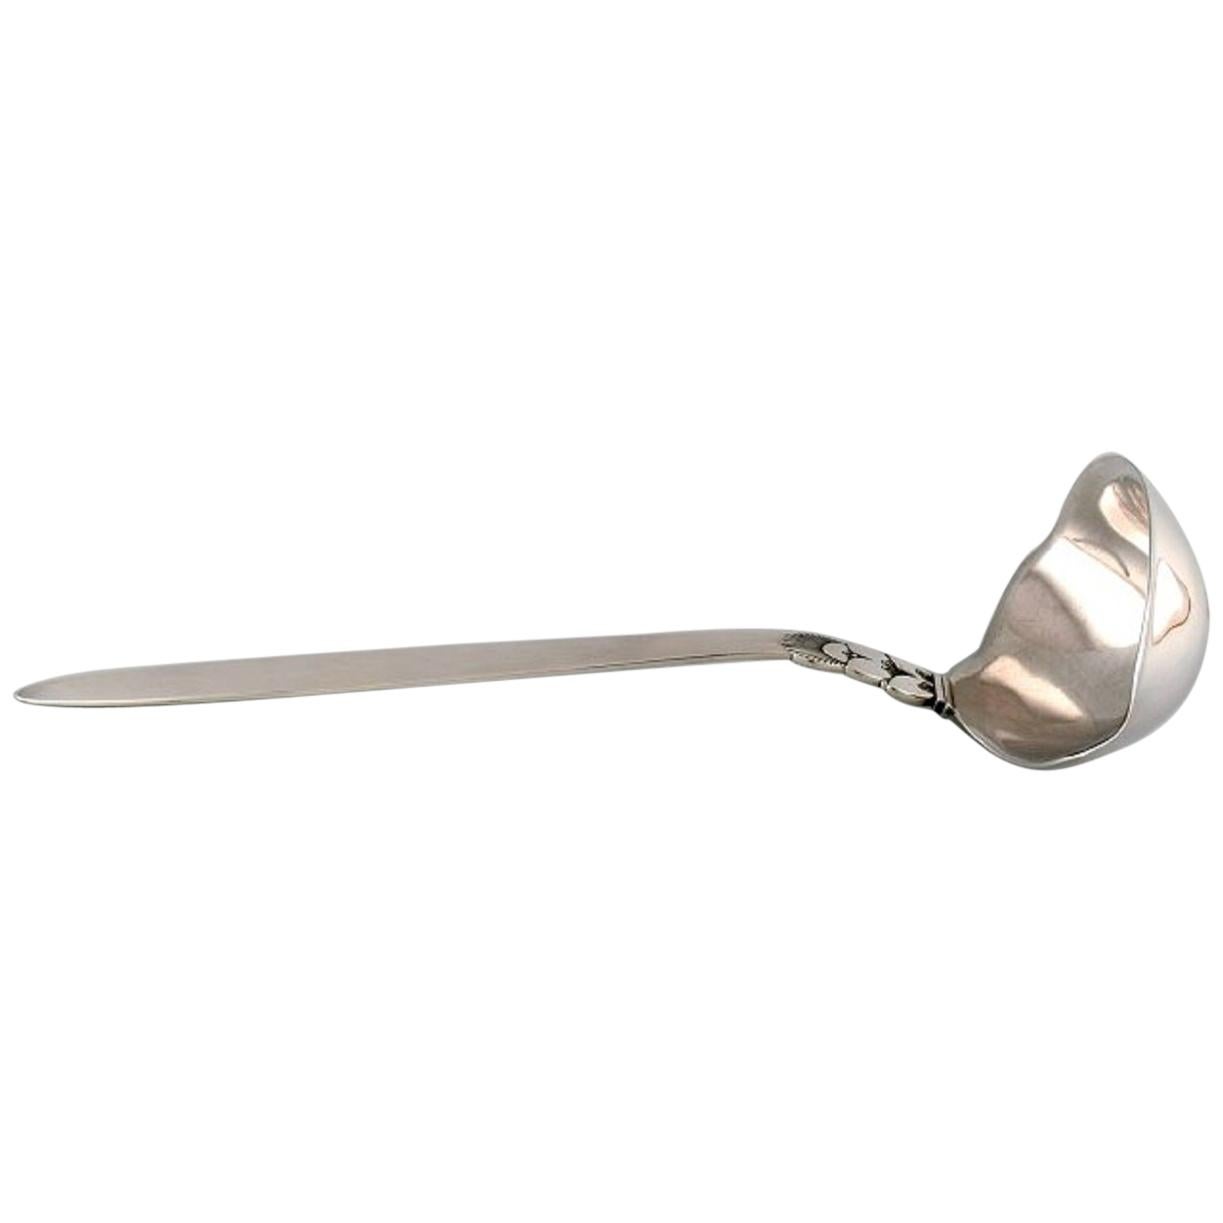 Large Georg Jensen "Cactus" Soup Ladle in Sterling Silver, Dated 1931